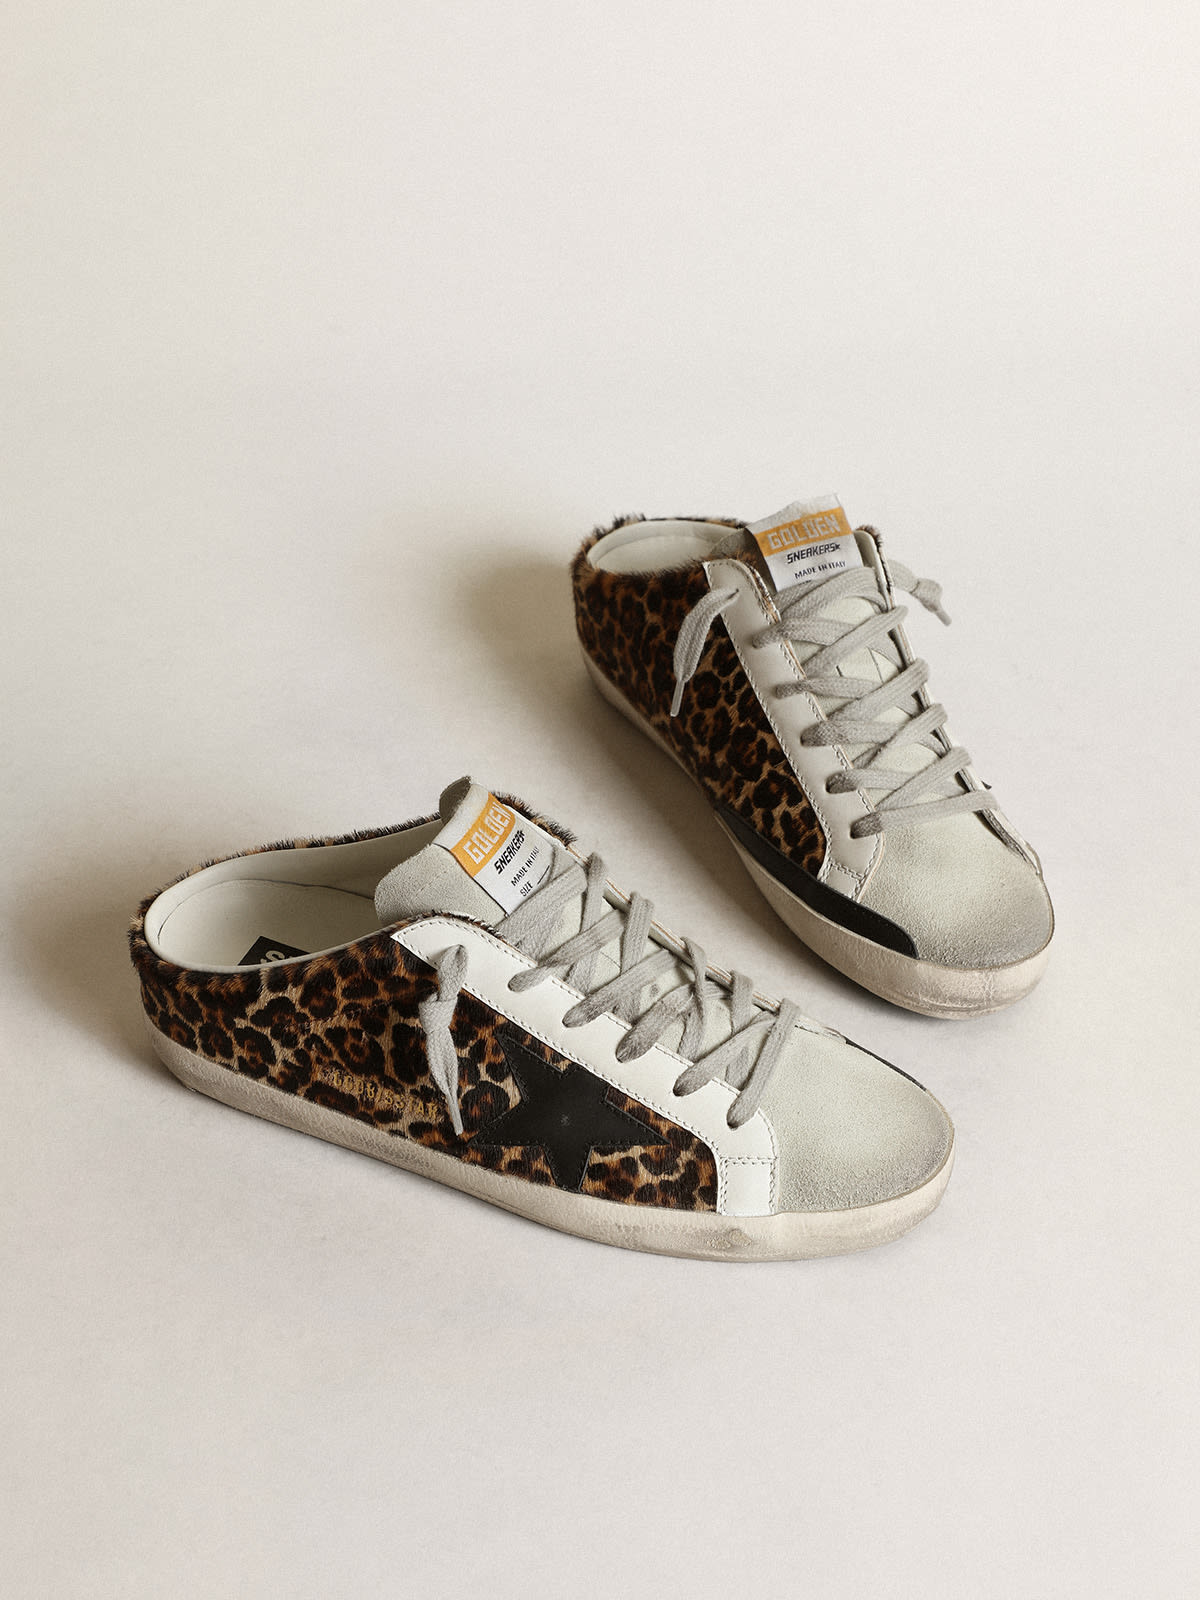 Golden Goose - Super-Star Sabots in leopard-print pony skin with black leather star and ice-gray suede tongue in 